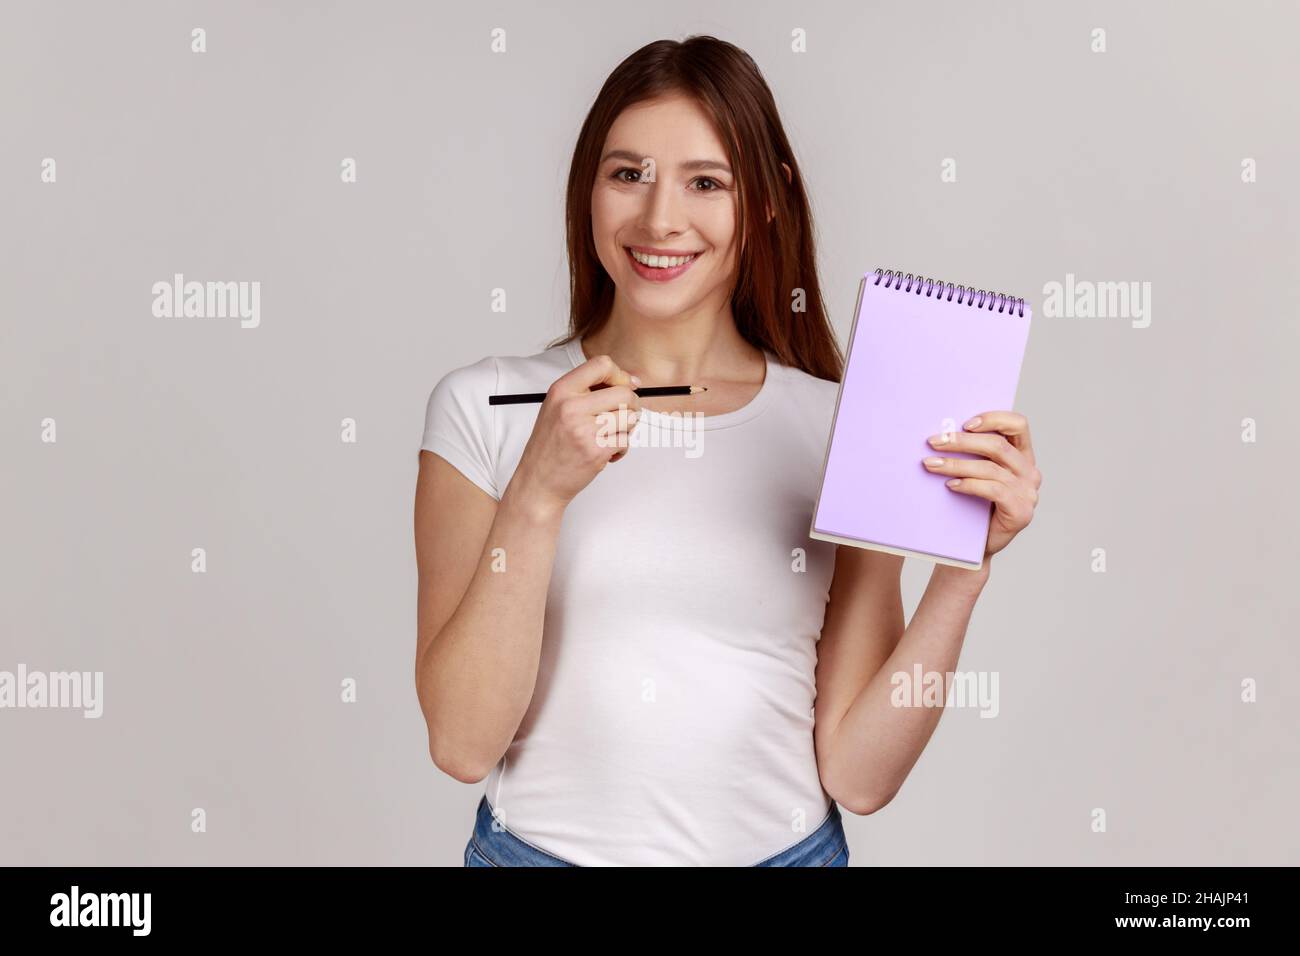 Positive smiling happy woman pointing at paper notebook with blank space for commercial text, advertising area, wearing white T-shirt. Indoor studio shot isolated on gray background. Stock Photo